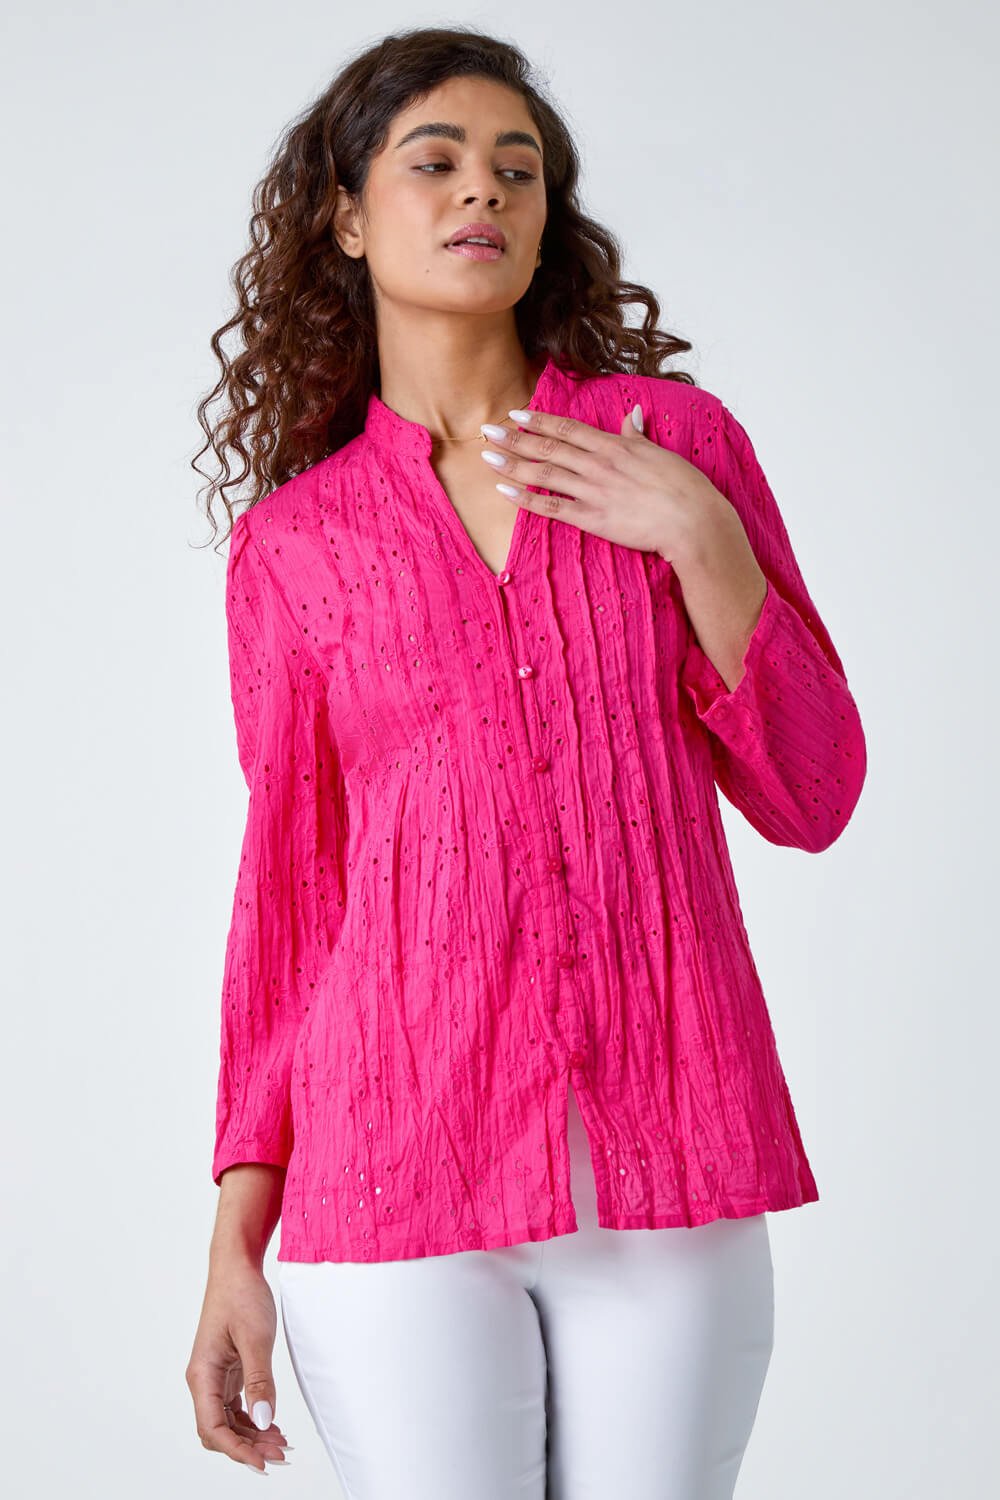 CERISE Embroidered Crinkle Cotton Blouse, Image 4 of 5